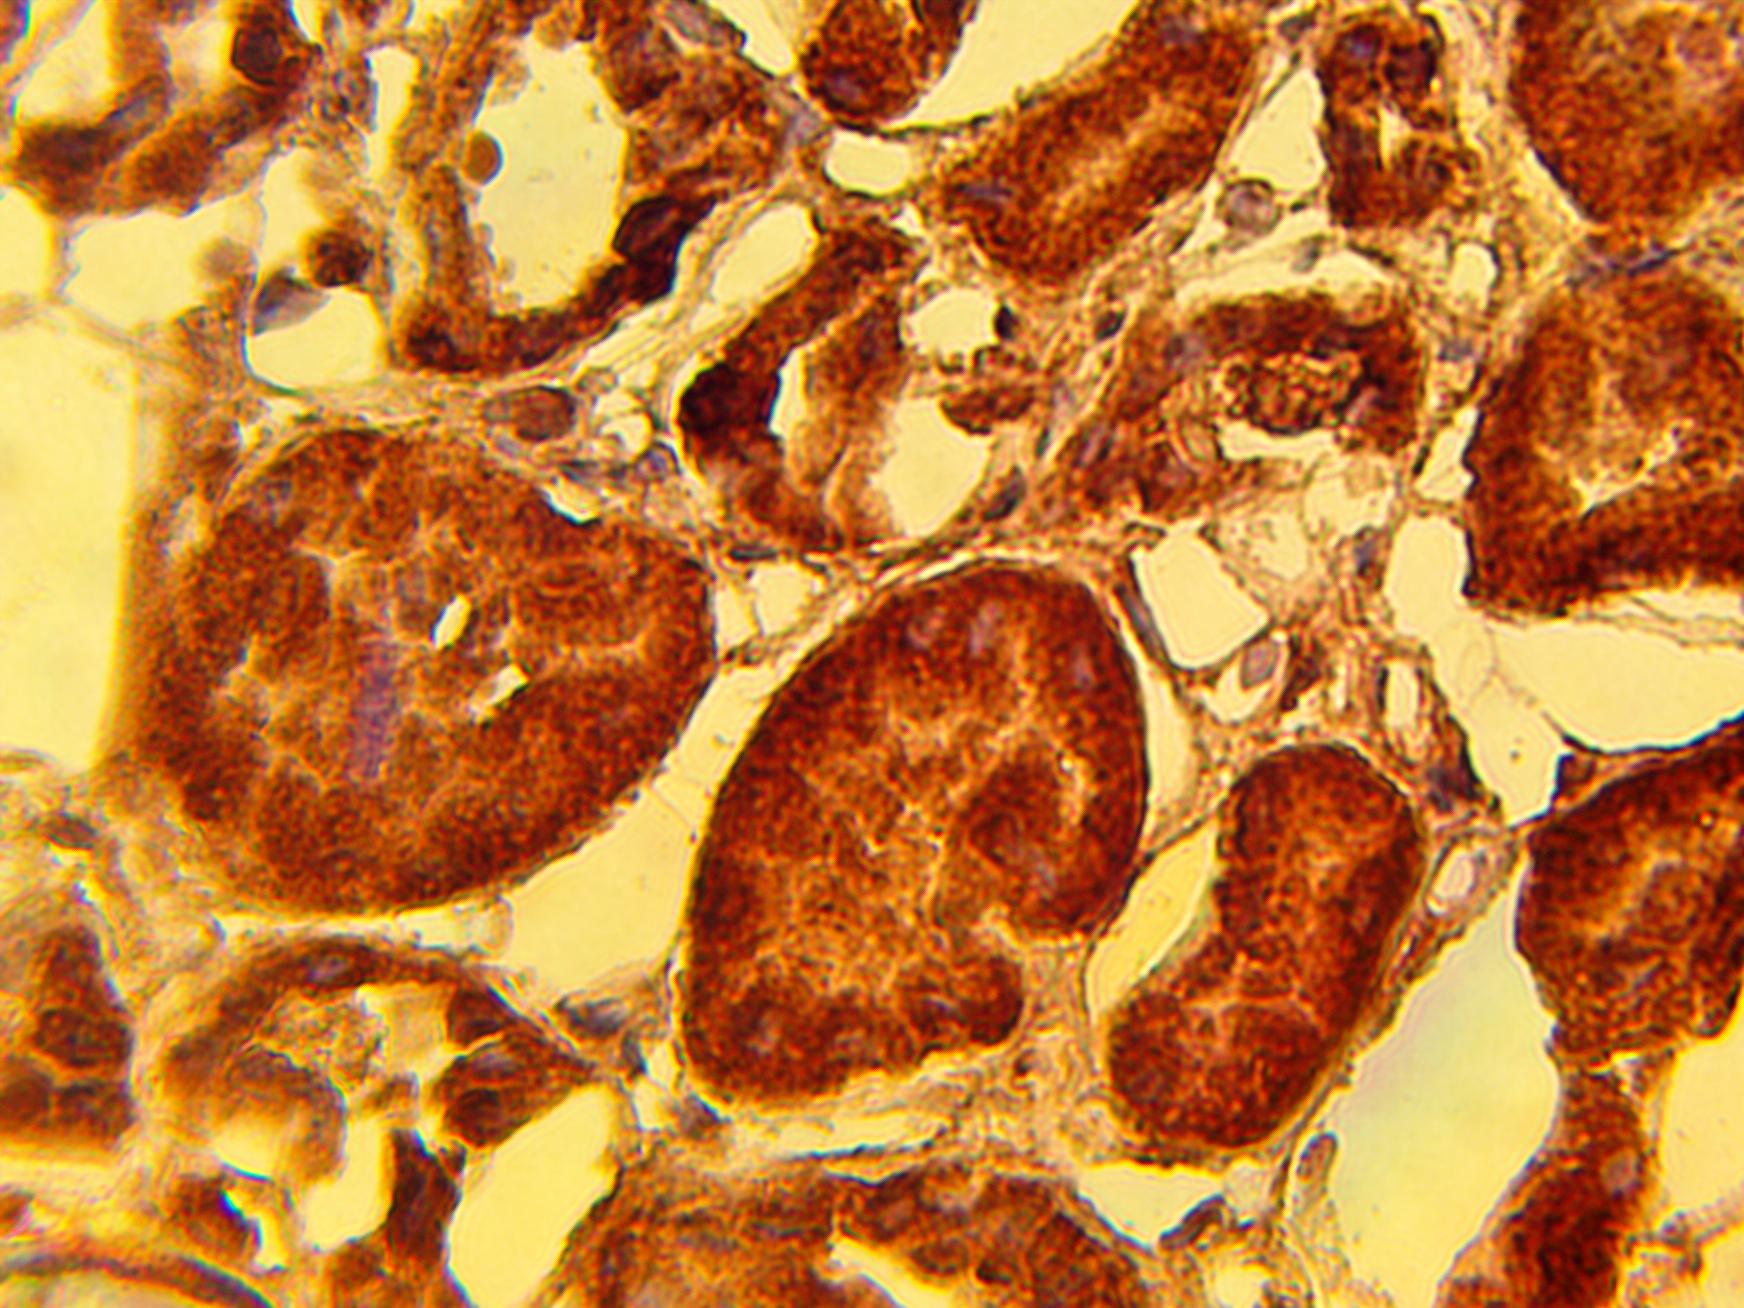 Immunohistochemical staining of normal human kidney tissue using PHLPP2 antibody (Cat. No. X2737P) at 15 µg/ml and detected using anti-Rabbit HRP secondary antibody and visualized using DAB substrate and hematoxylin counterstain.